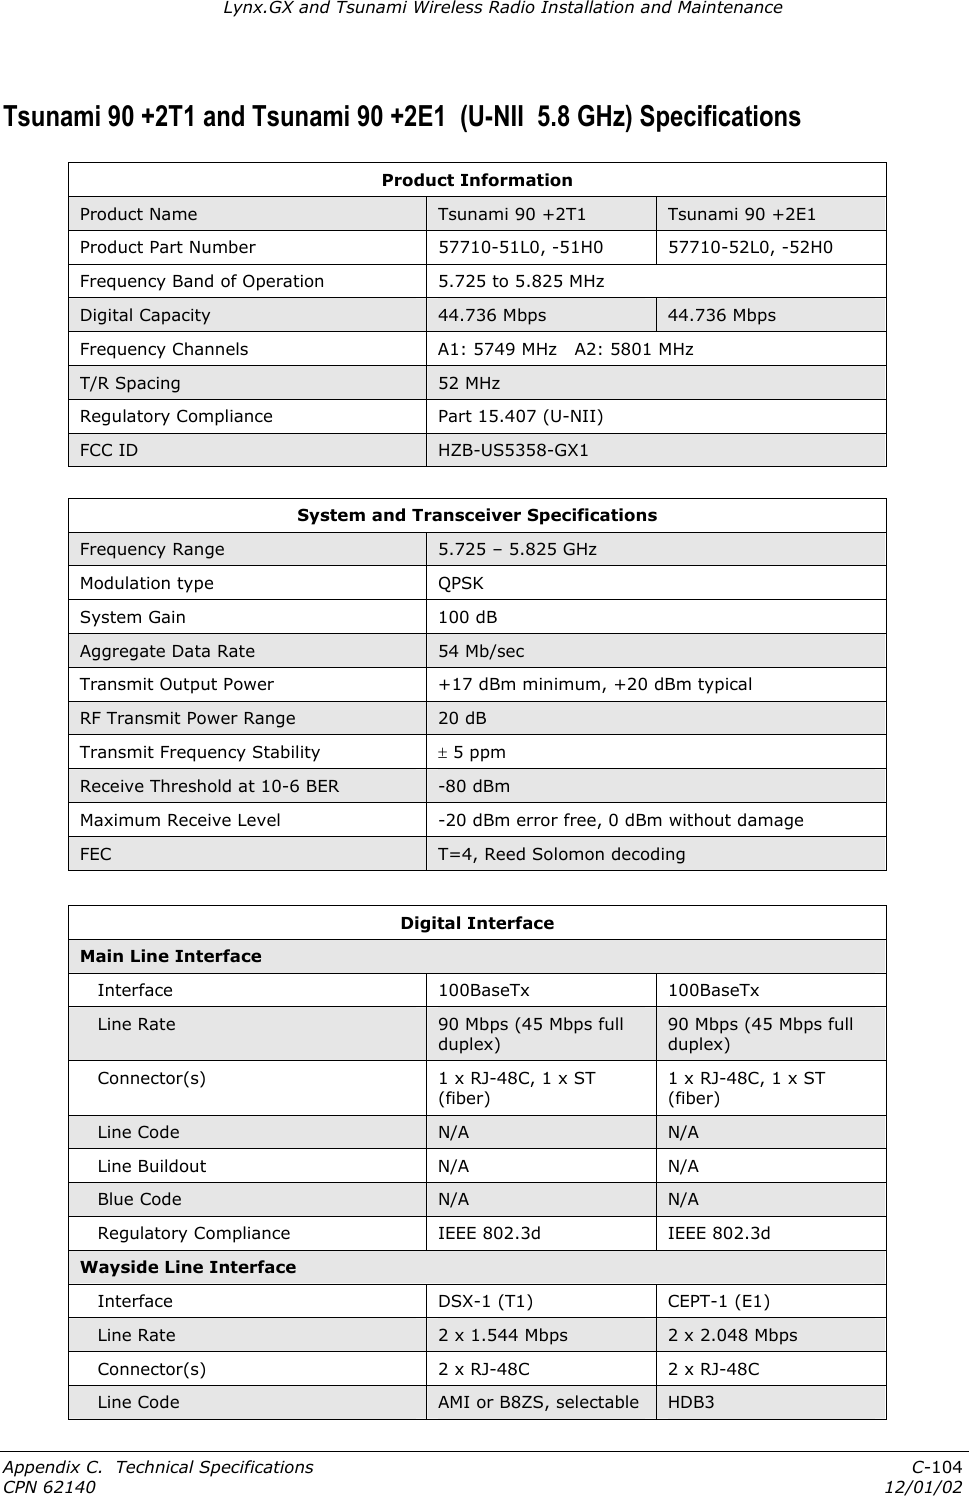 Lynx.GX and Tsunami Wireless Radio Installation and Maintenance Tsunami 90 +2T1 and Tsunami 90 +2E1  (U-NII  5.8 GHz) Specifications Product Information Product Name  Tsunami 90 +2T1  Tsunami 90 +2E1 Product Part Number  57710-51L0, -51H0  57710-52L0, -52H0 Frequency Band of Operation  5.725 to 5.825 MHz Digital Capacity  44.736 Mbps  44.736 Mbps Frequency Channels  A1: 5749 MHz   A2: 5801 MHz T/R Spacing  52 MHz Regulatory Compliance  Part 15.407 (U-NII) FCC ID   HZB-US5358-GX1  System and Transceiver Specifications Frequency Range  5.725 – 5.825 GHz Modulation type  QPSK System Gain  100 dB Aggregate Data Rate  54 Mb/sec Transmit Output Power  +17 dBm minimum, +20 dBm typical RF Transmit Power Range  20 dB Transmit Frequency Stability  ± 5 ppm  Receive Threshold at 10-6 BER  -80 dBm Maximum Receive Level  -20 dBm error free, 0 dBm without damage FEC  T=4, Reed Solomon decoding  Digital Interface Main Line Interface    Interface  100BaseTx  100BaseTx    Line Rate  90 Mbps (45 Mbps full duplex) 90 Mbps (45 Mbps full duplex)    Connector(s)  1 x RJ-48C, 1 x ST (fiber) 1 x RJ-48C, 1 x ST (fiber)    Line Code  N/A  N/A    Line Buildout  N/A  N/A    Blue Code  N/A  N/A    Regulatory Compliance  IEEE 802.3d  IEEE 802.3d Wayside Line Interface    Interface  DSX-1 (T1)  CEPT-1 (E1)     Line Rate  2 x 1.544 Mbps  2 x 2.048 Mbps    Connector(s)  2 x RJ-48C  2 x RJ-48C    Line Code  AMI or B8ZS, selectable  HDB3 Appendix C.  Technical Specifications  C-104 CPN 62140  12/01/02 